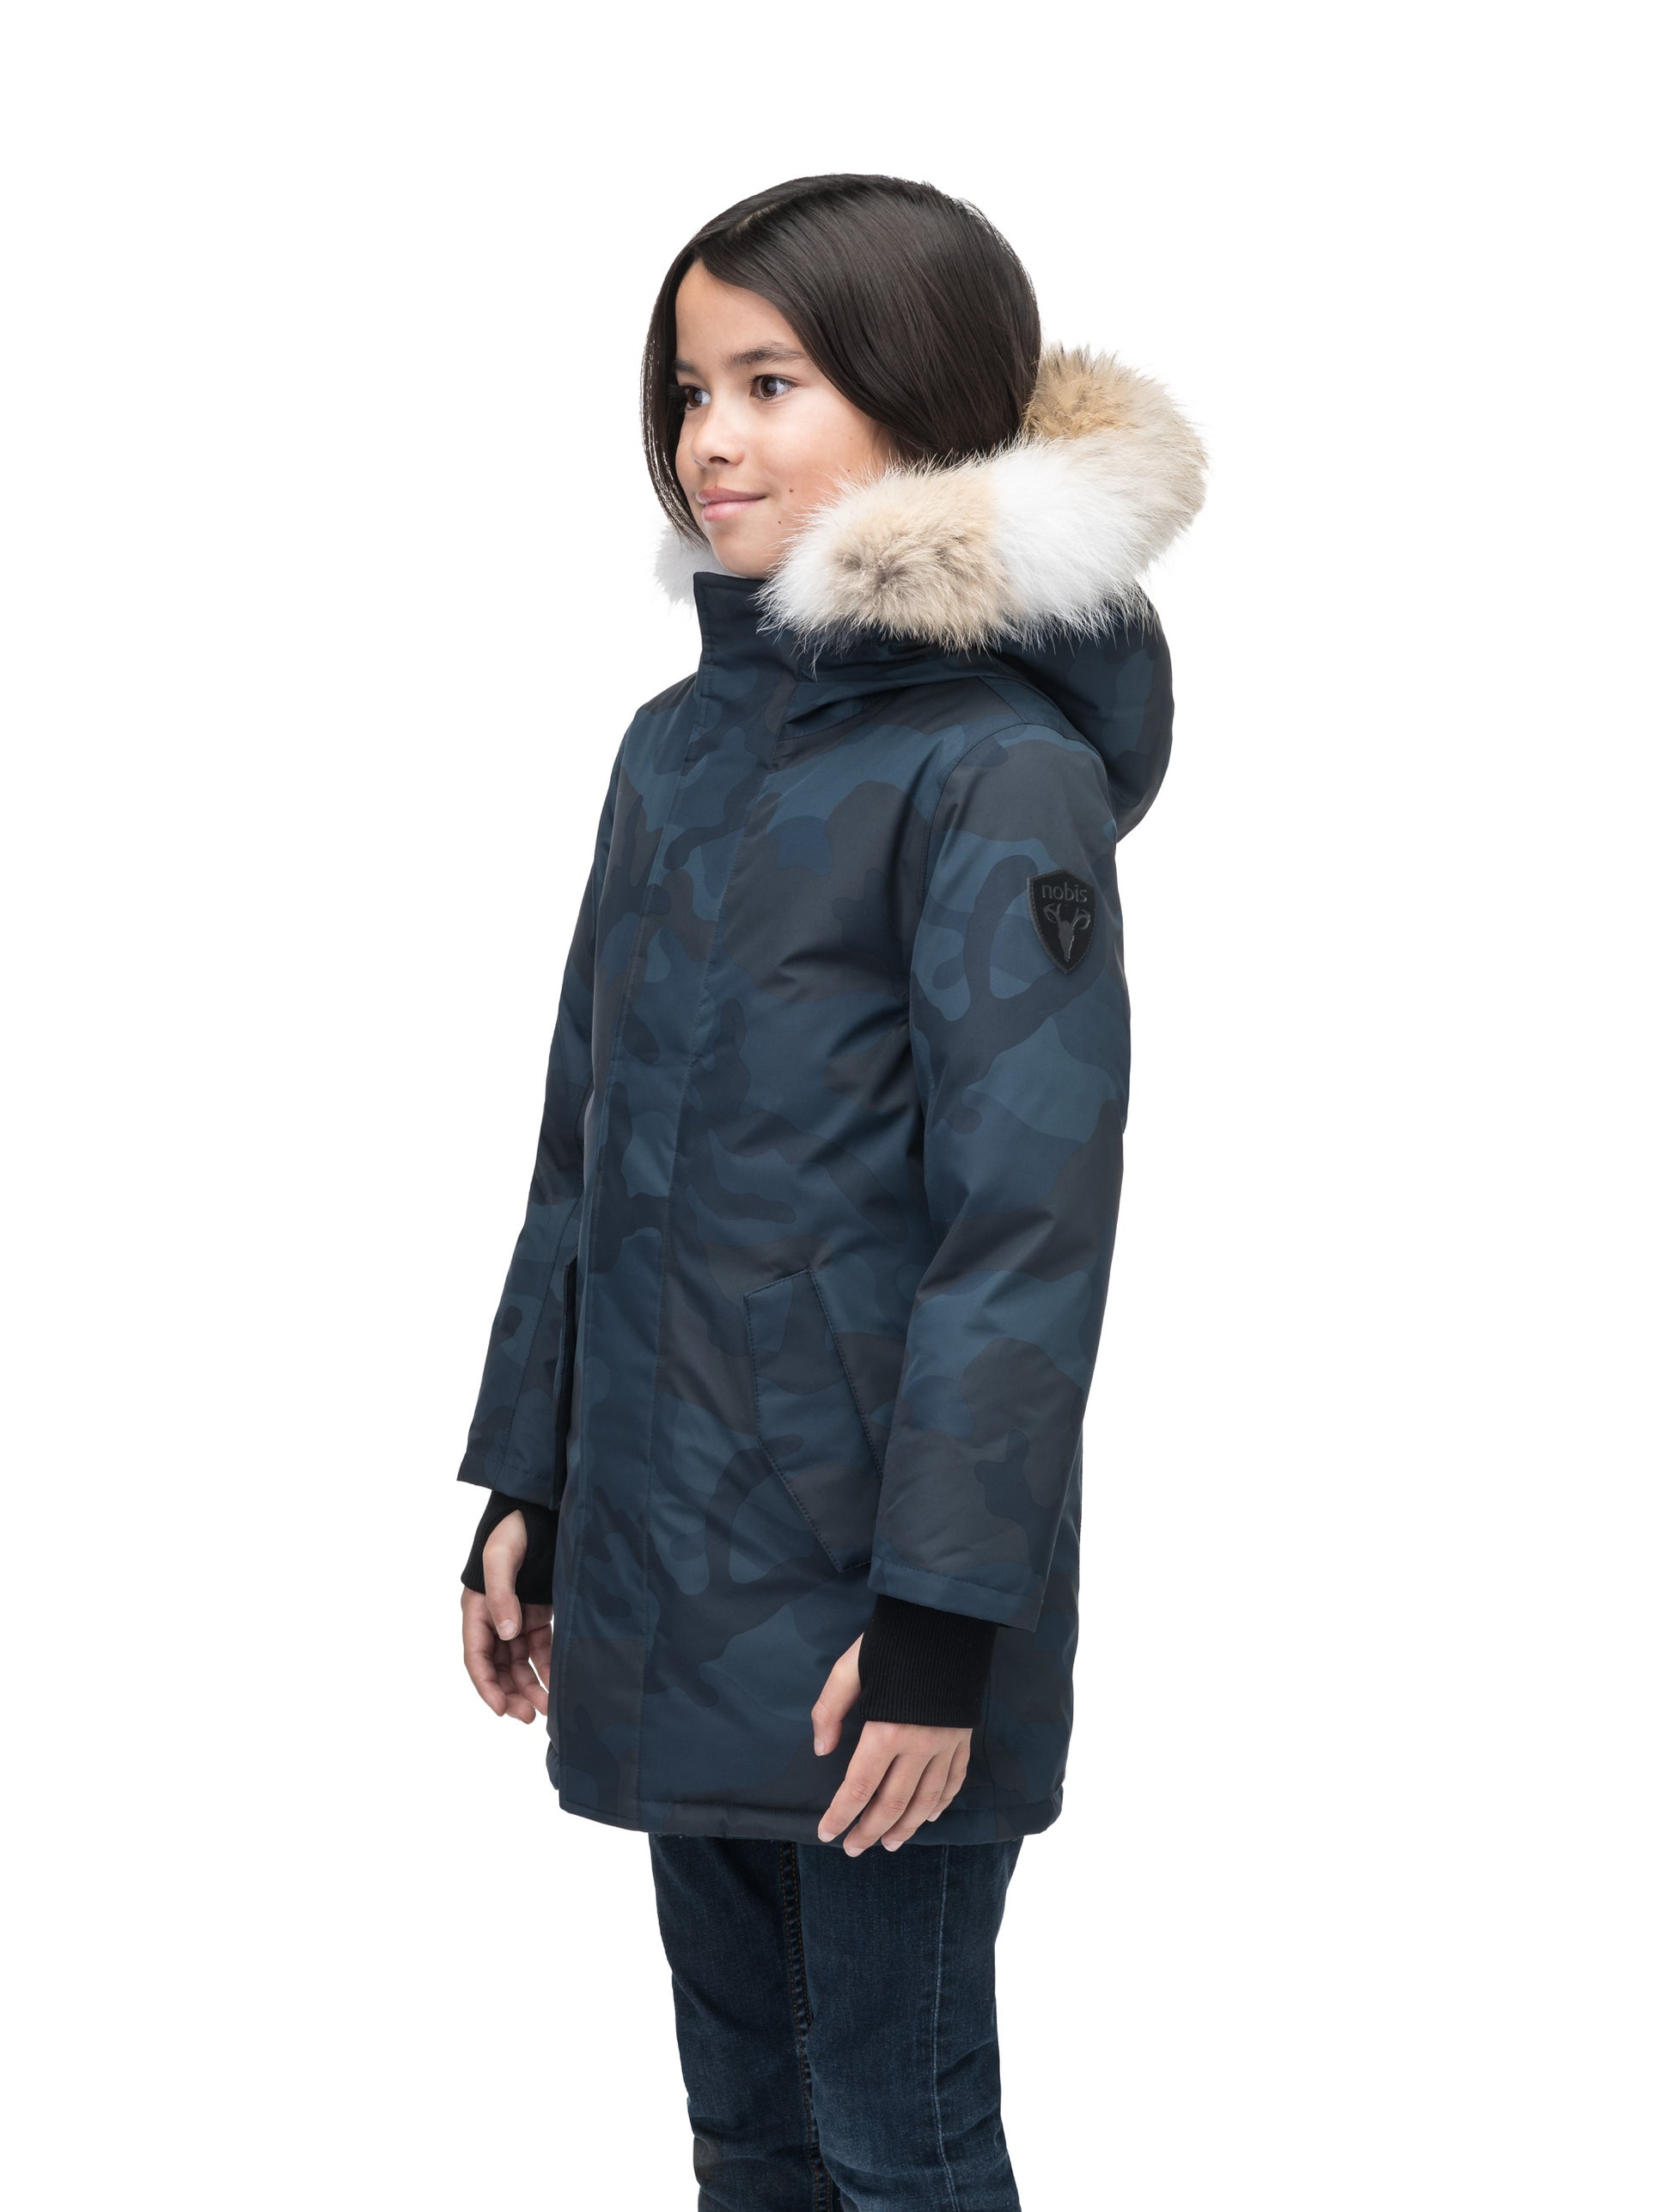 Kids' thigh length down-filled parka with non-removable hood and removable coyote fur trim in Navy Camo